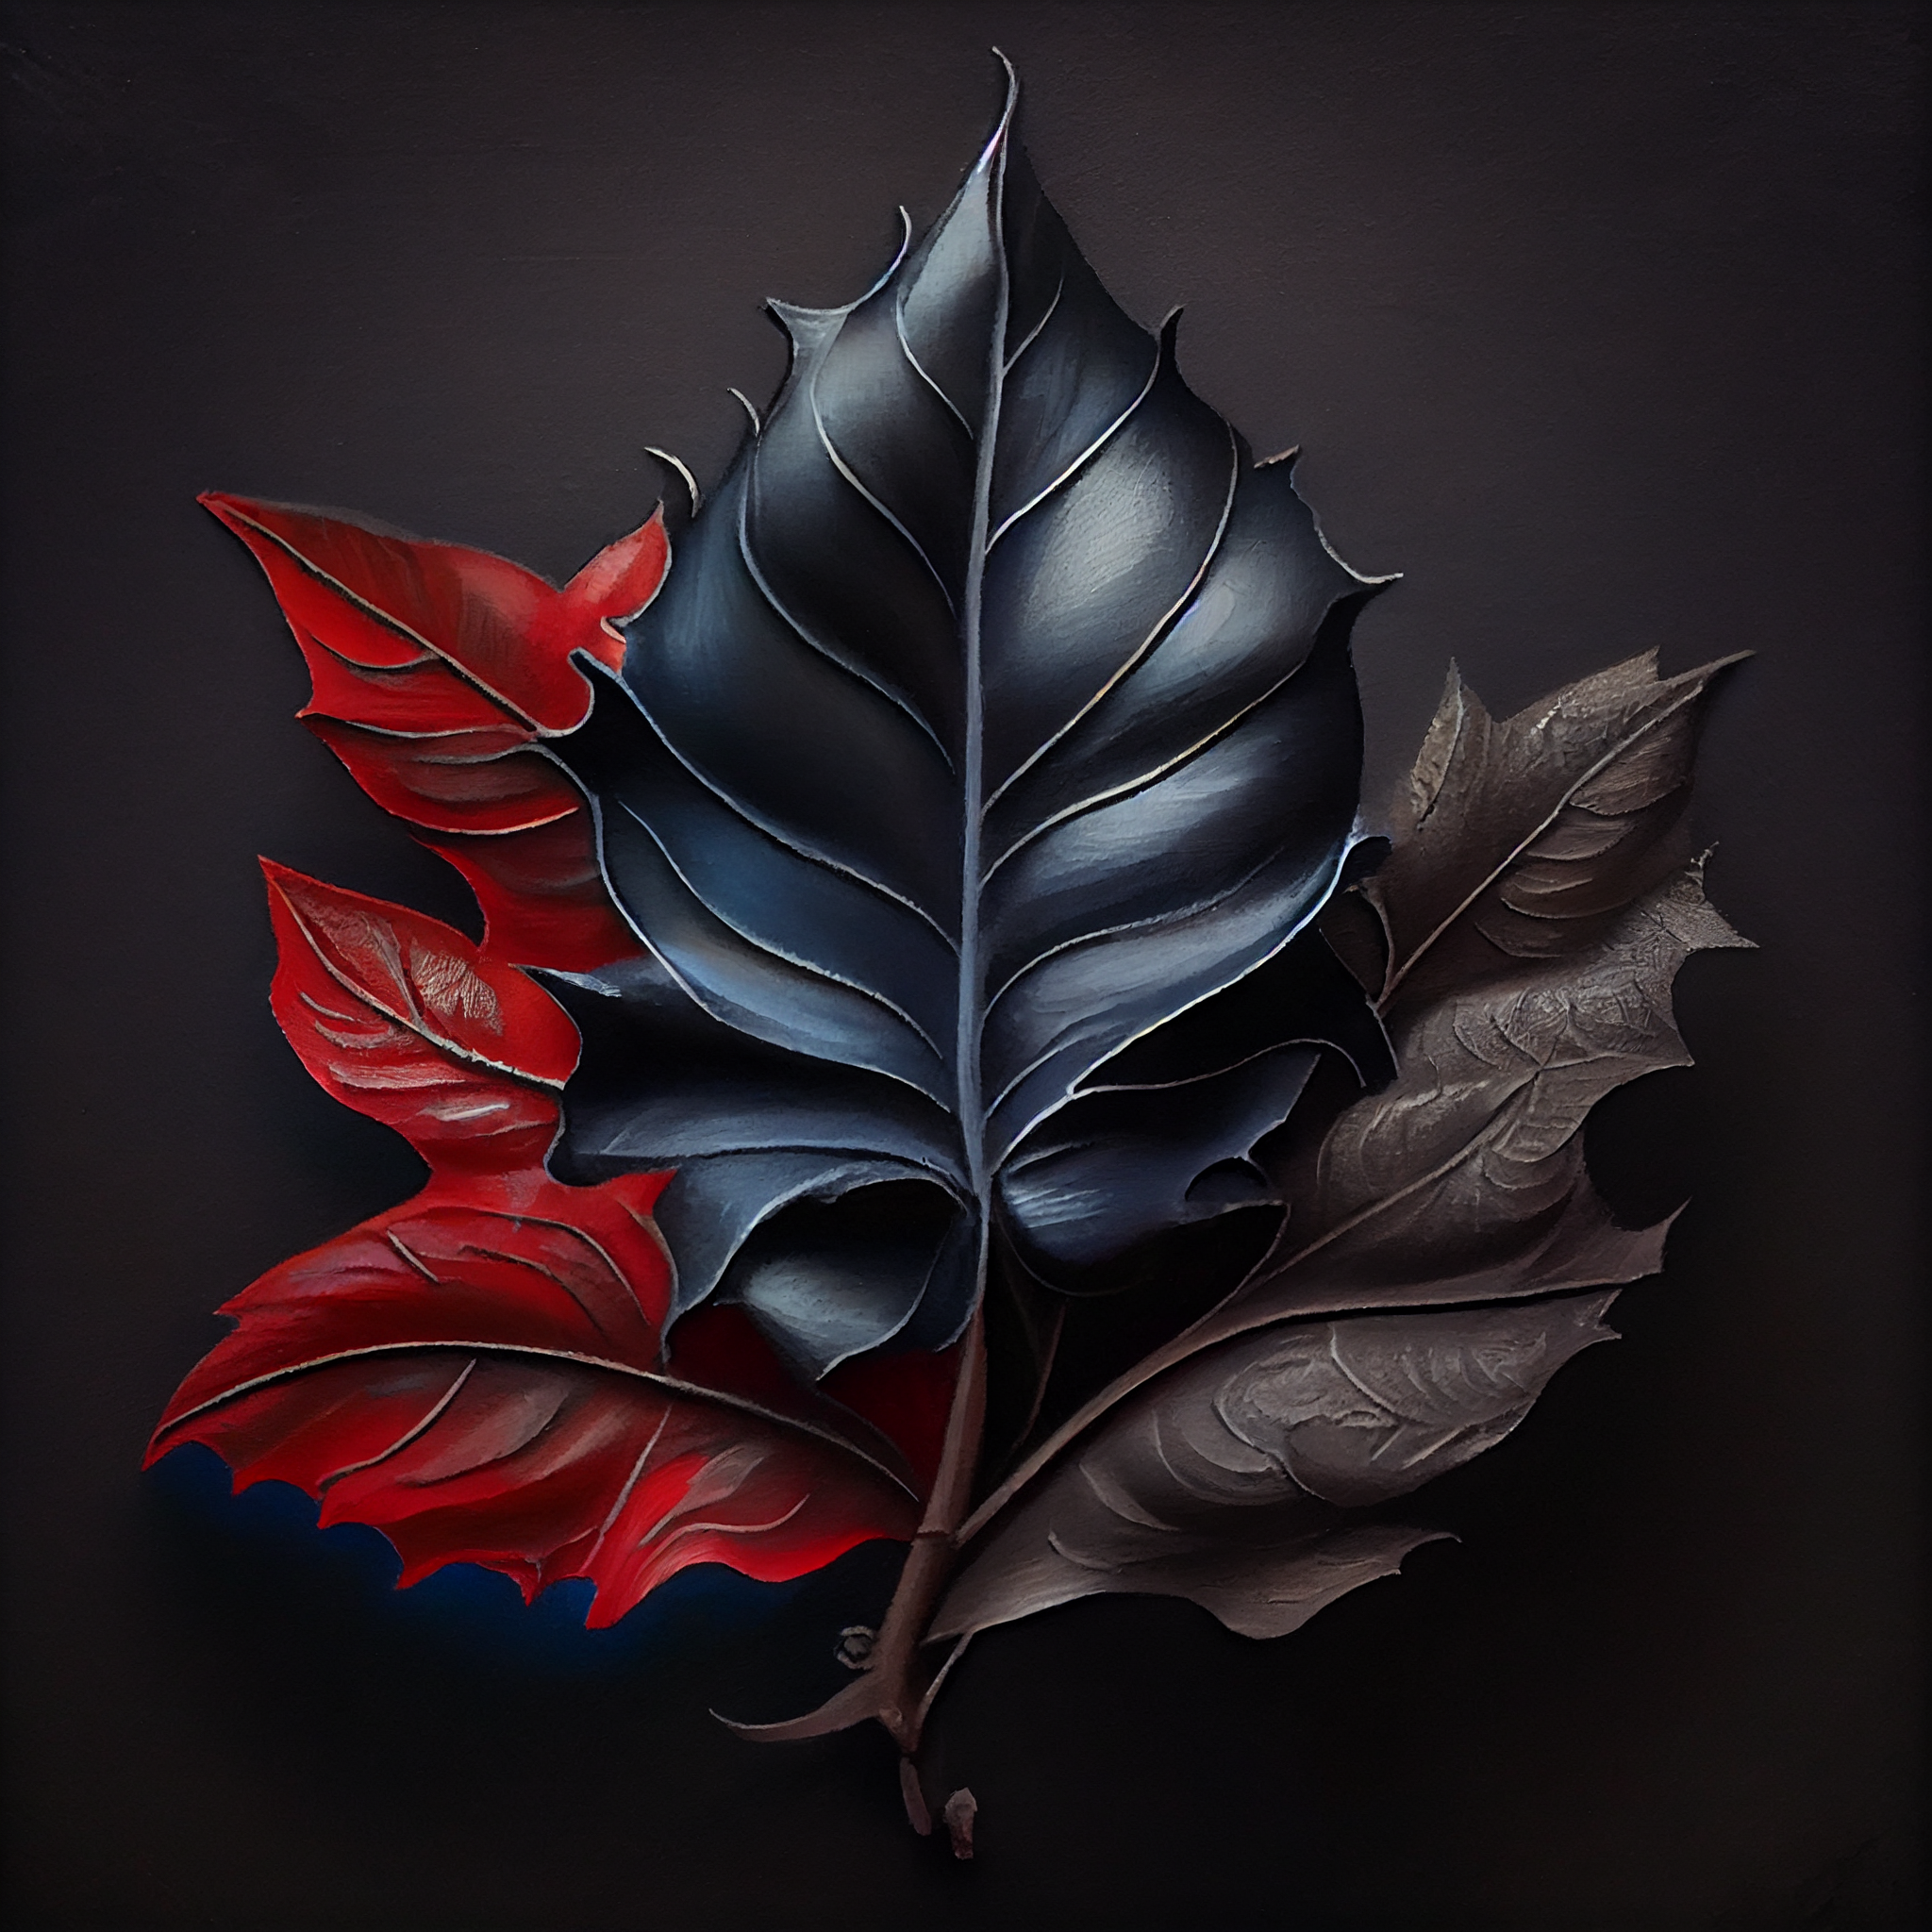 Crimson Leaves: Art Print of Three Red Velvet, Black, and Brown Leaves, Perfect for Living Room, Office Wall Decor, and Gifting